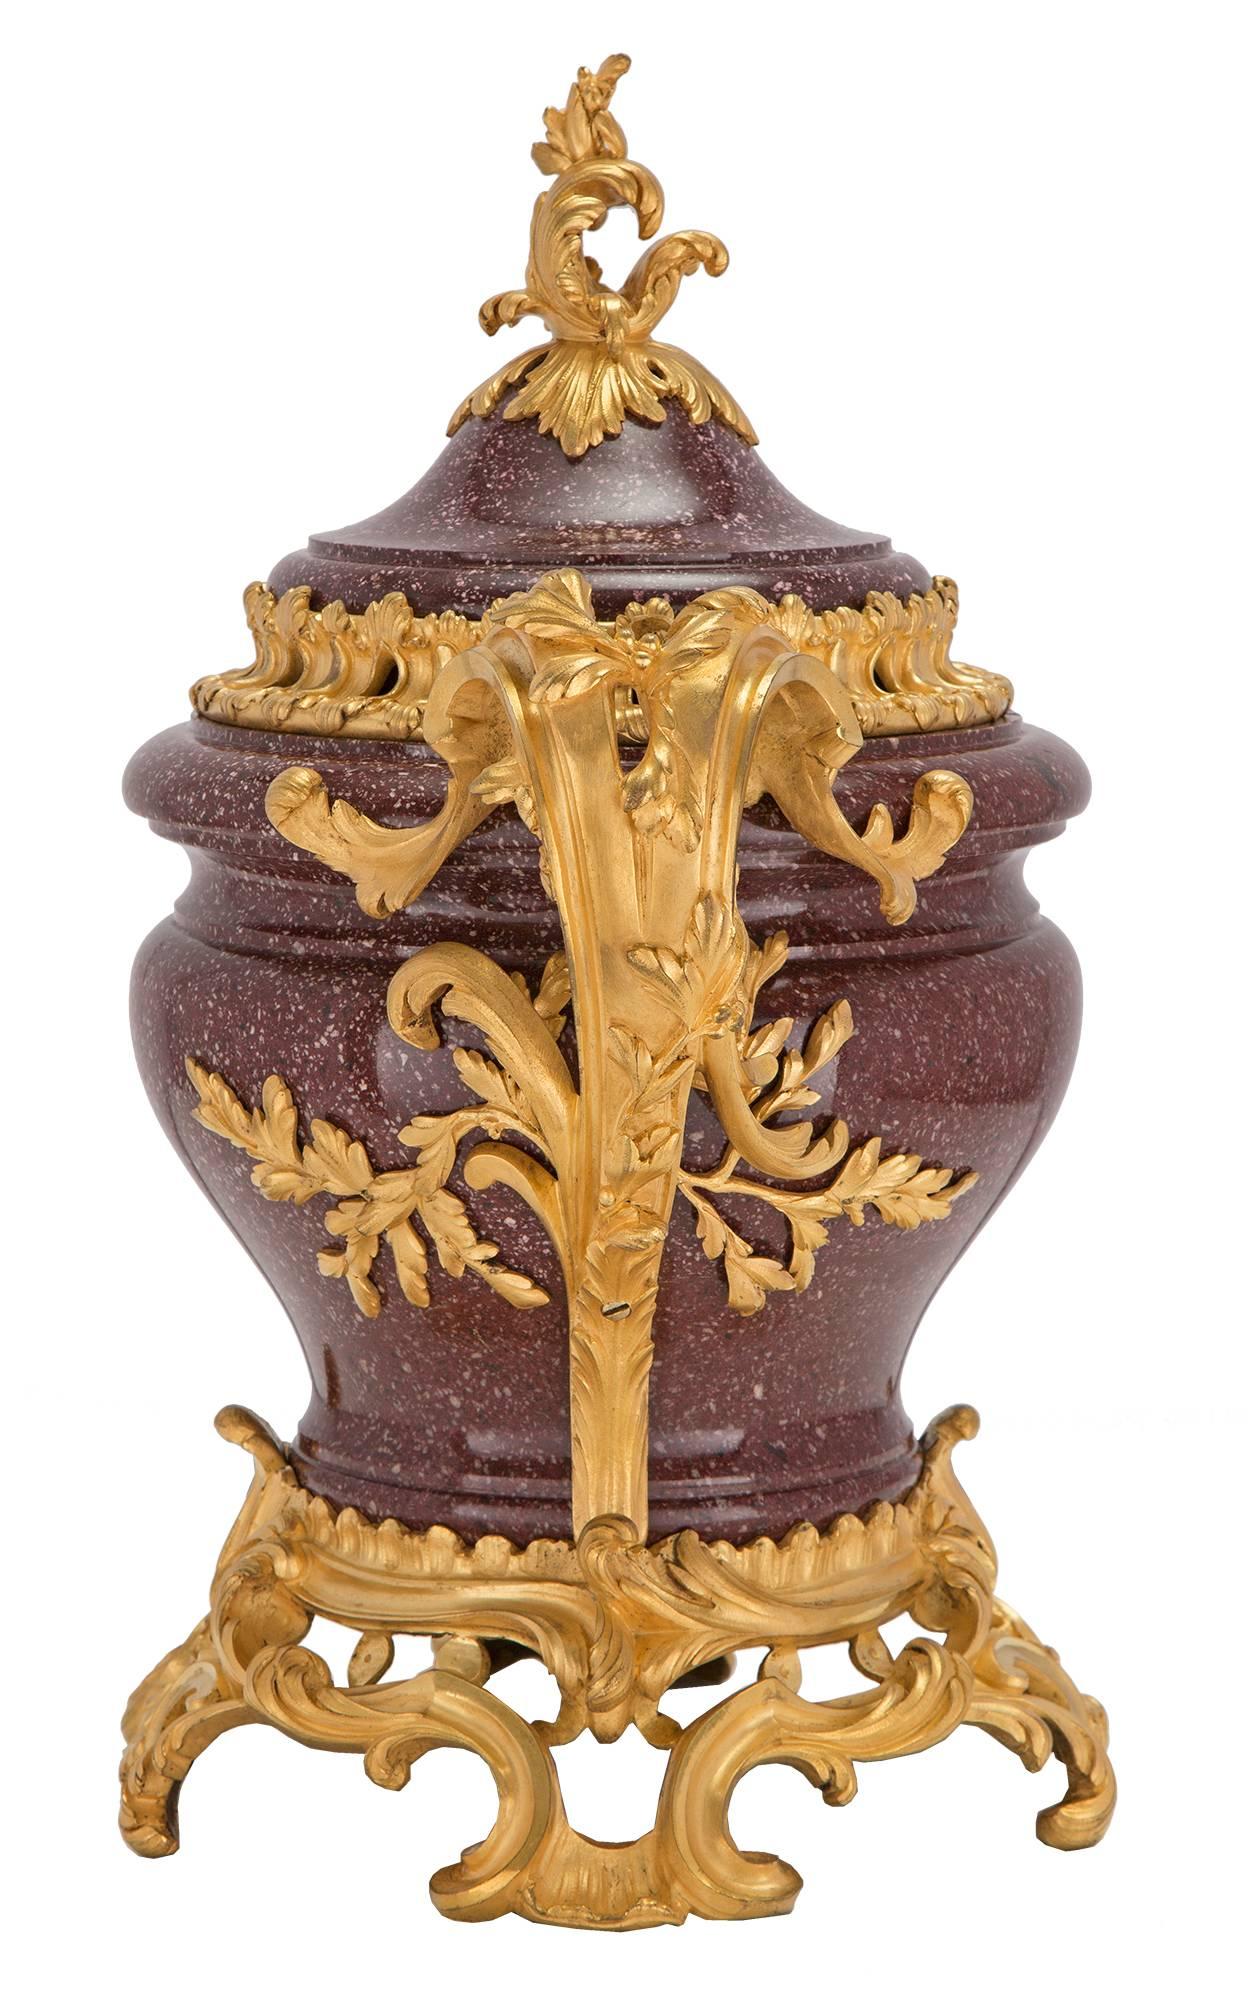 An exquisite and very high quality French 18th century Louis XV period Porphyry and ormolu lidded urn. The urn is raised by a sensational and richly chased pierced ormolu base with lavish scrolled designs, and supports centered by a fine seashell